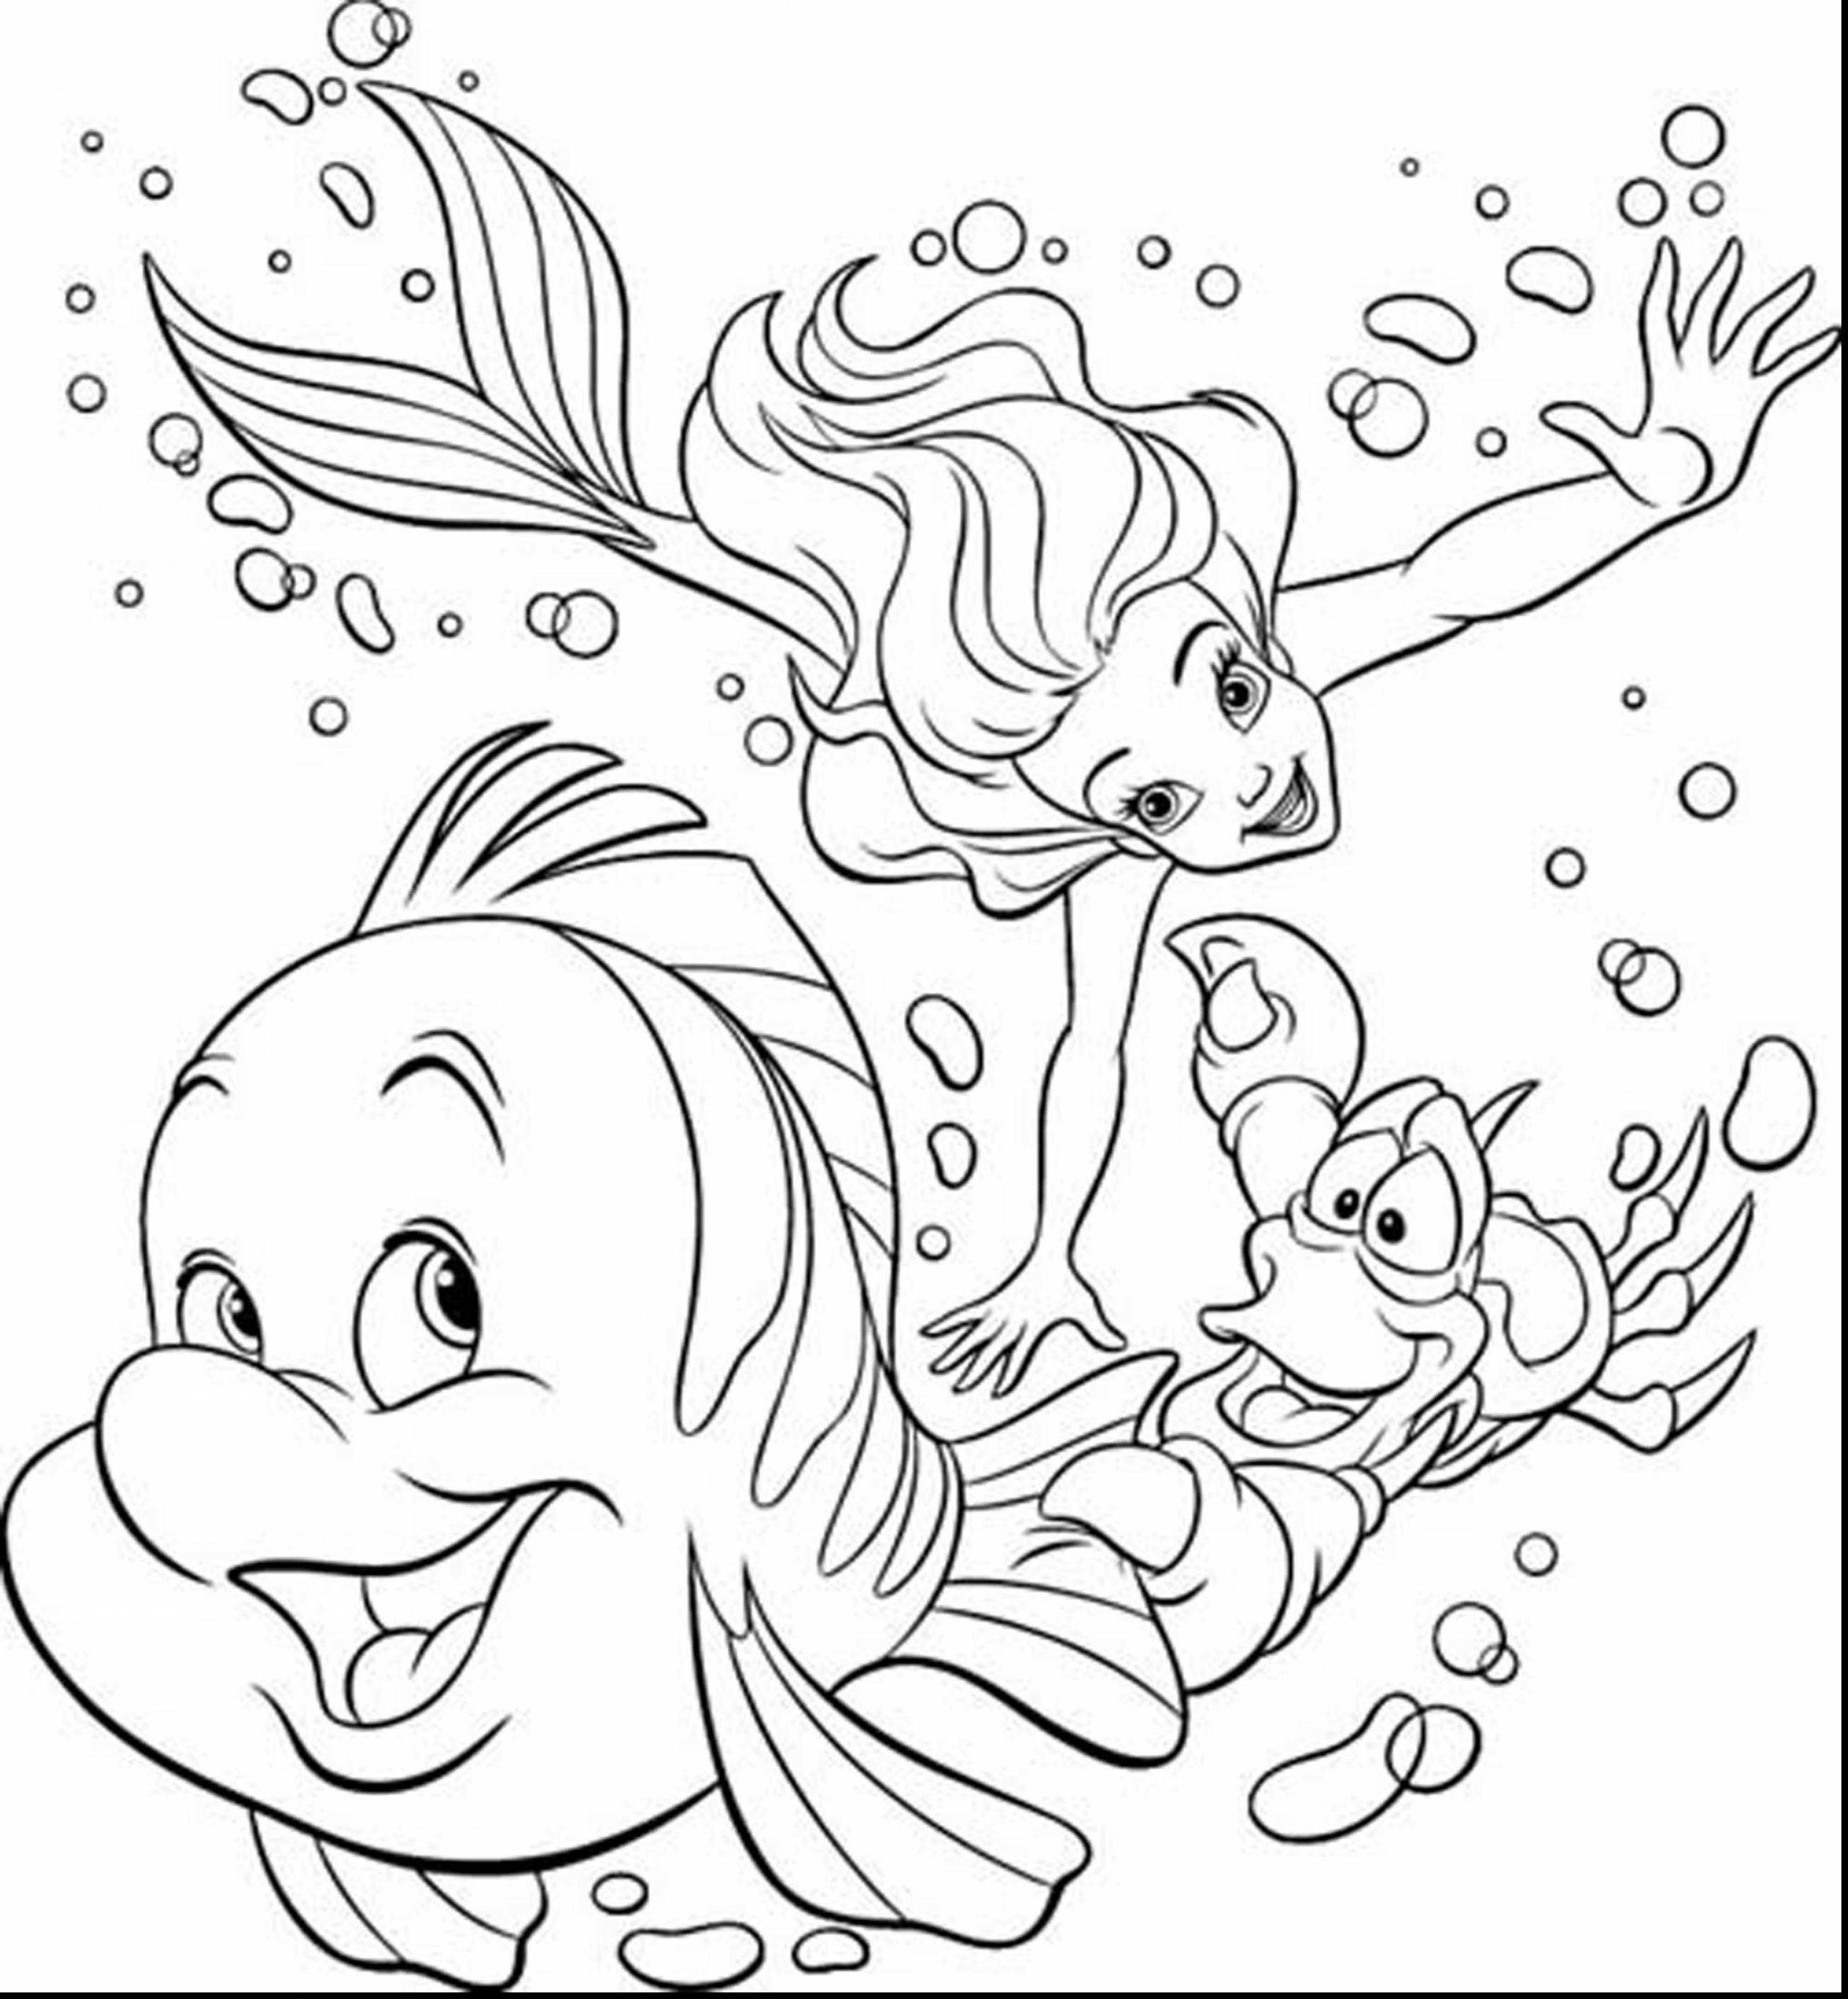 Disney Coloring Pages at GetColorings.com   Free printable ...